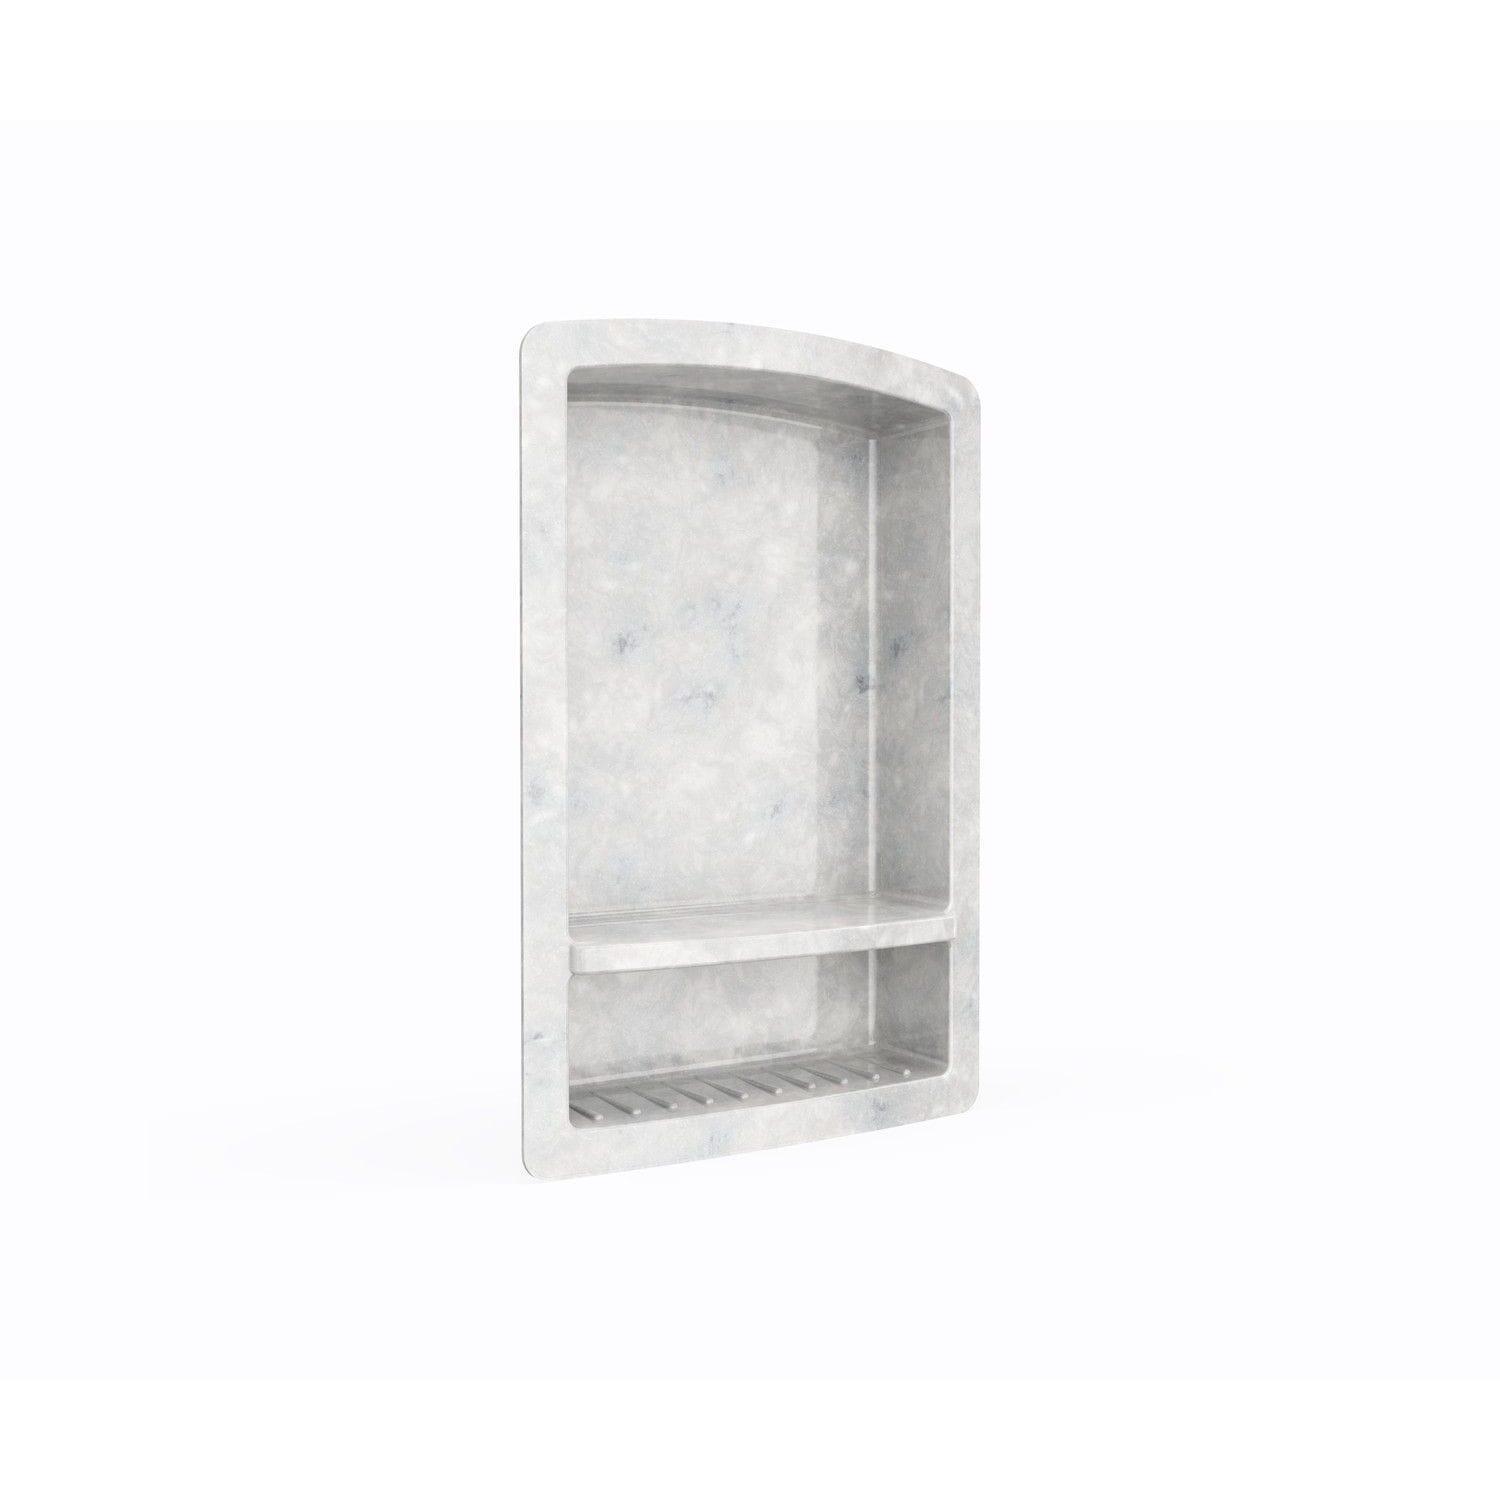 5-Pack of Corner Shelves – Solid Surface Solutions